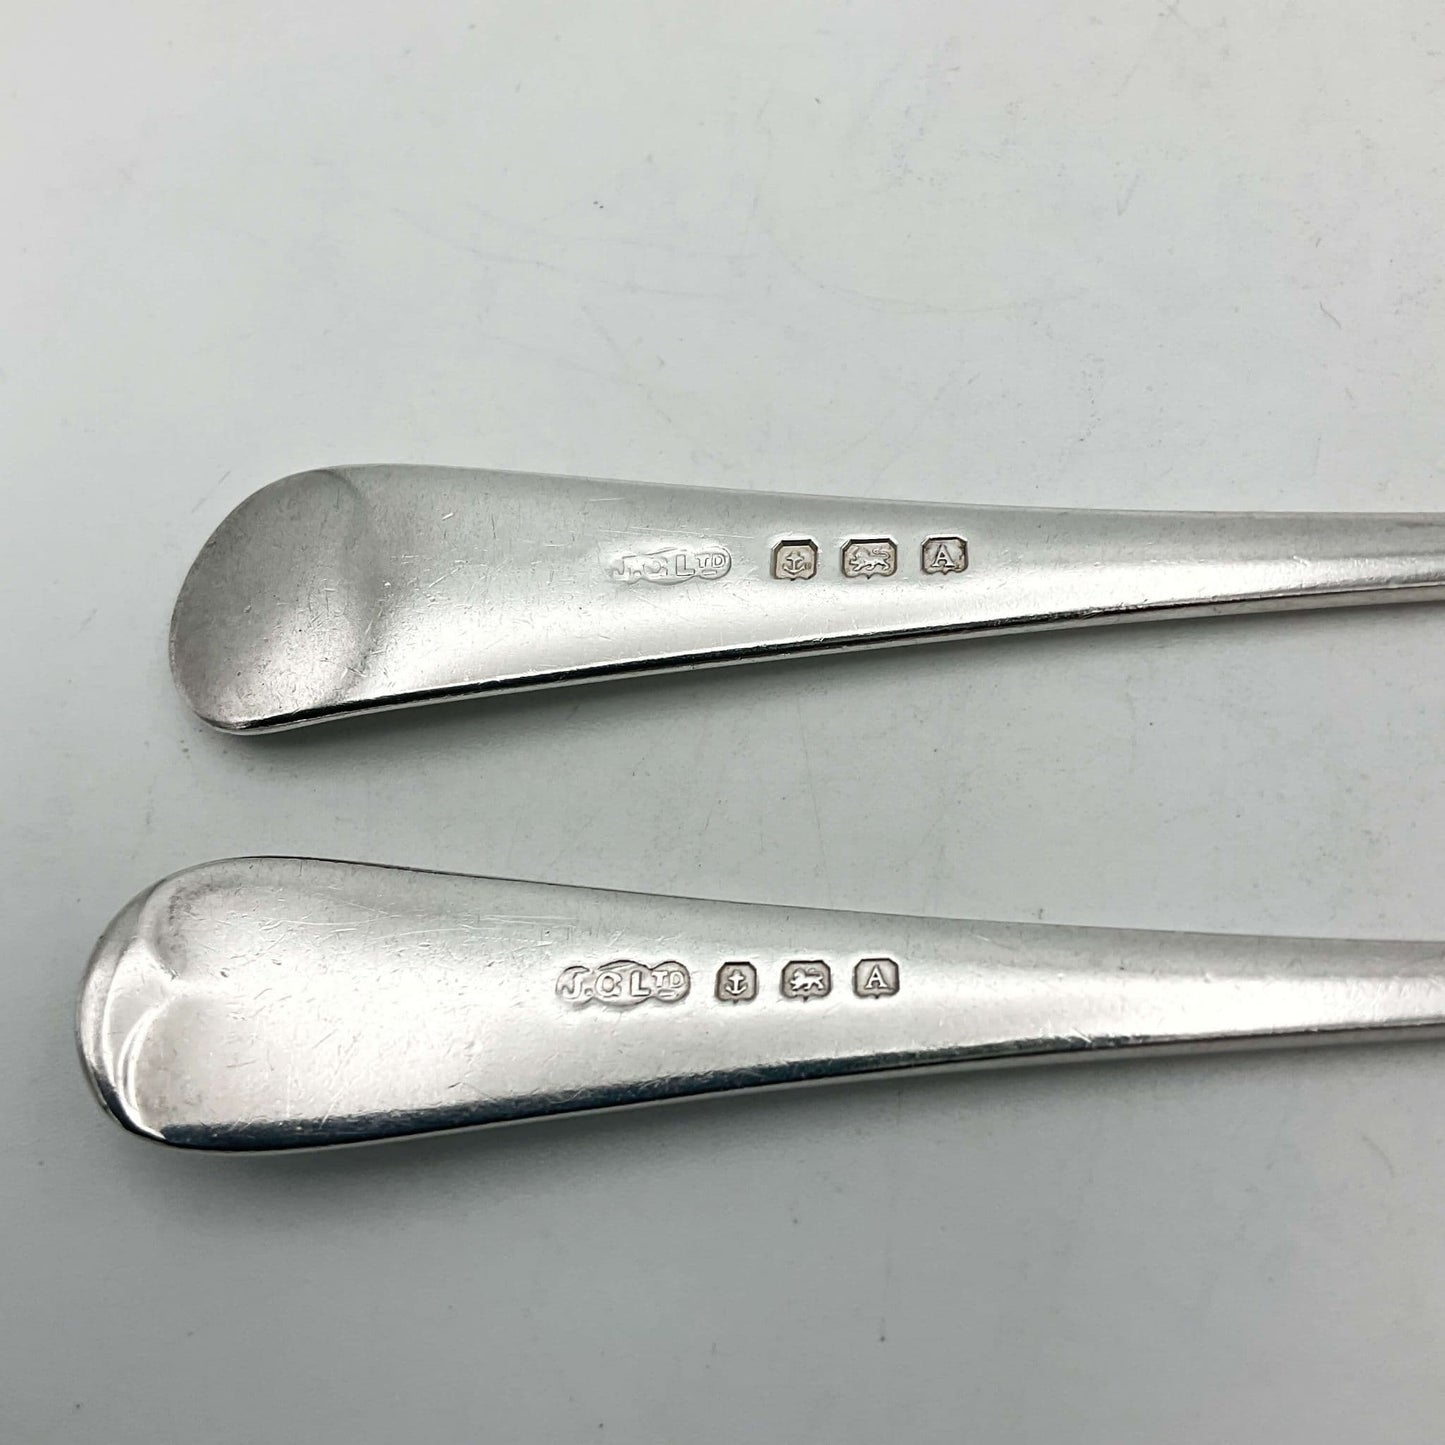 Silver hallmarks on handles of vintage spoon and fork